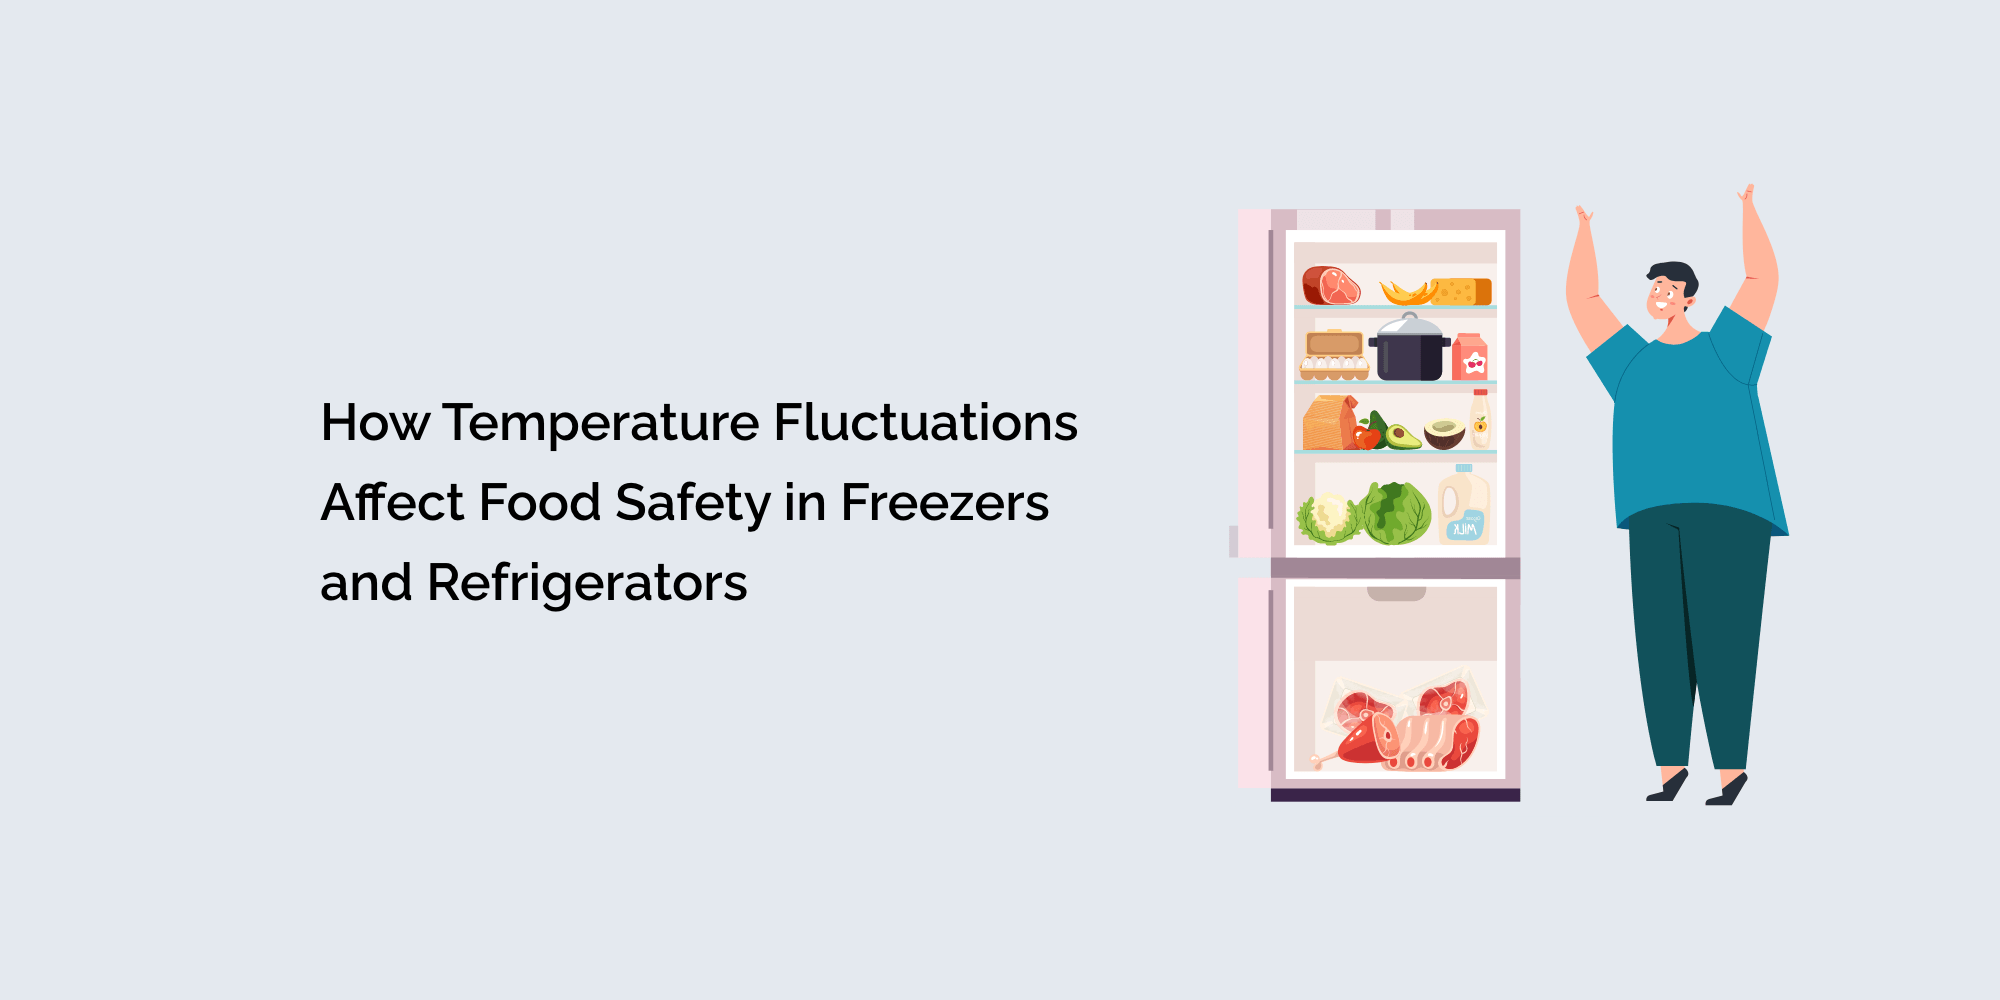 How Temperature Fluctuations Affect Food Safety in Freezers and Refrigerators